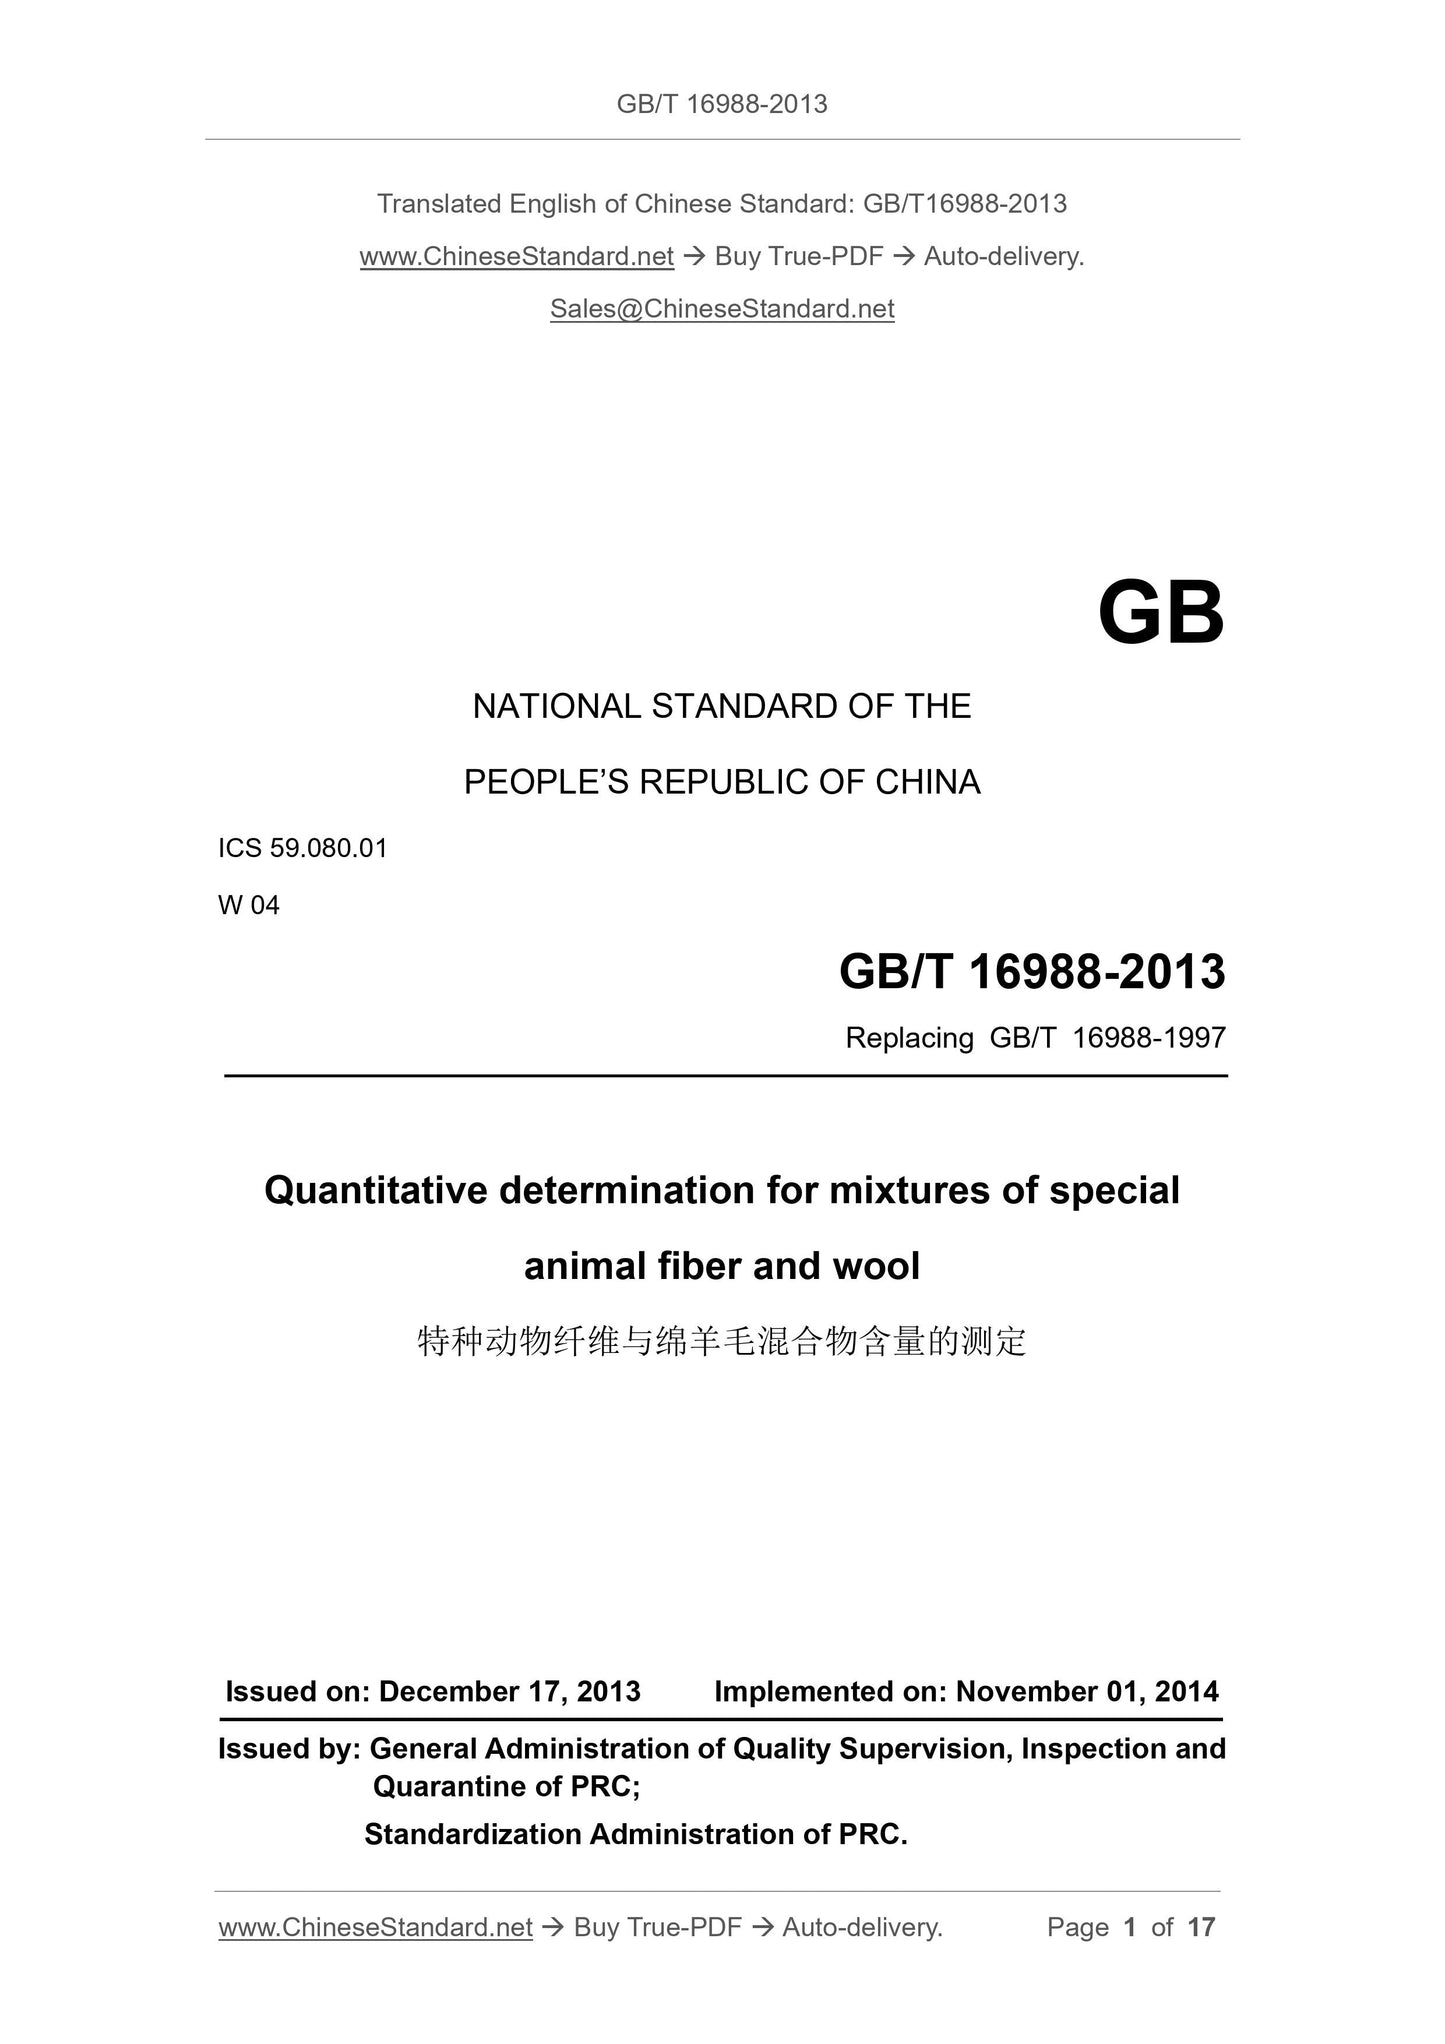 GB/T 16988-2013 Page 1